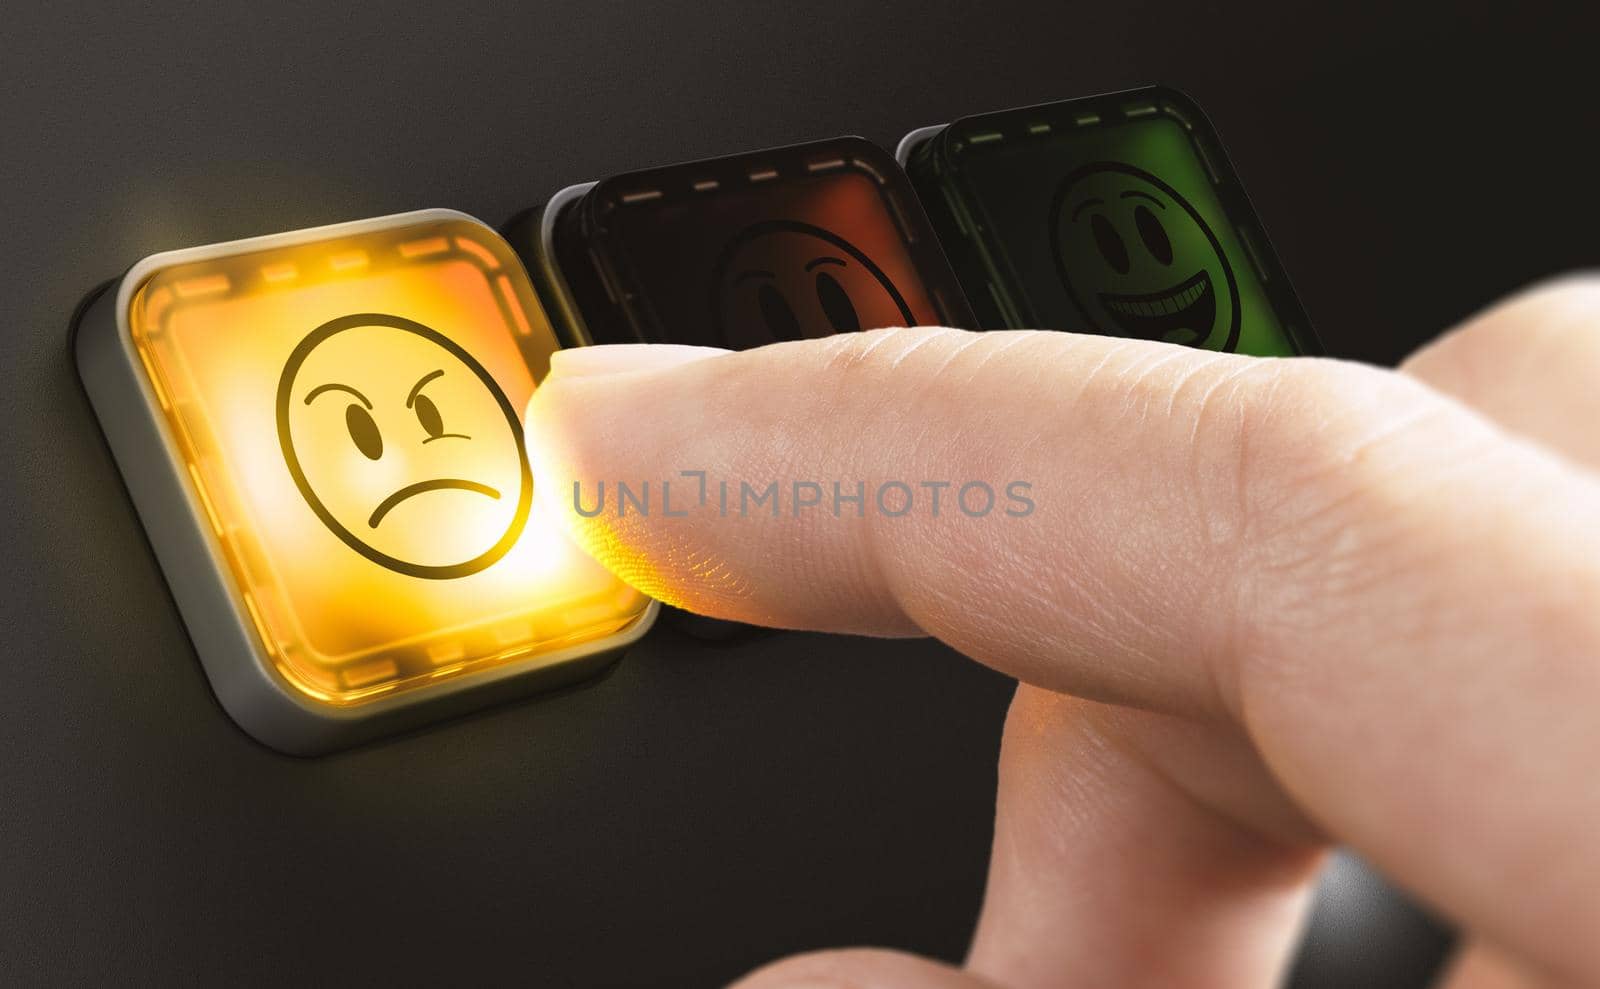 Unhappy customer leaving a negative feedback. Bad user experience. Composite image between a 3d illustration and a photography.